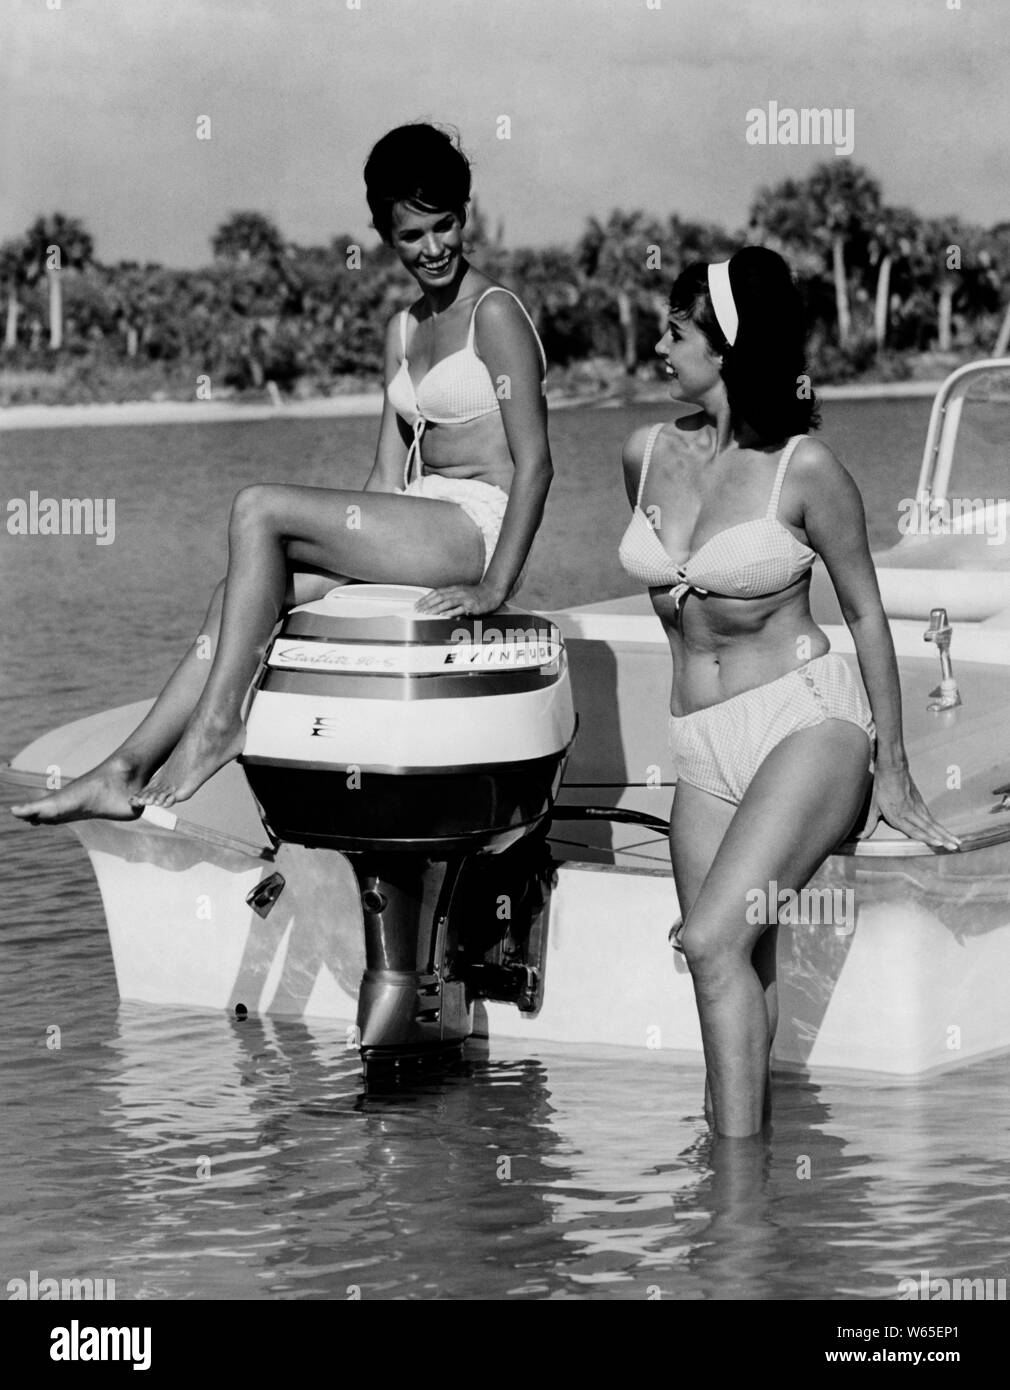 outboard motorboat, 1961 Stock Photo